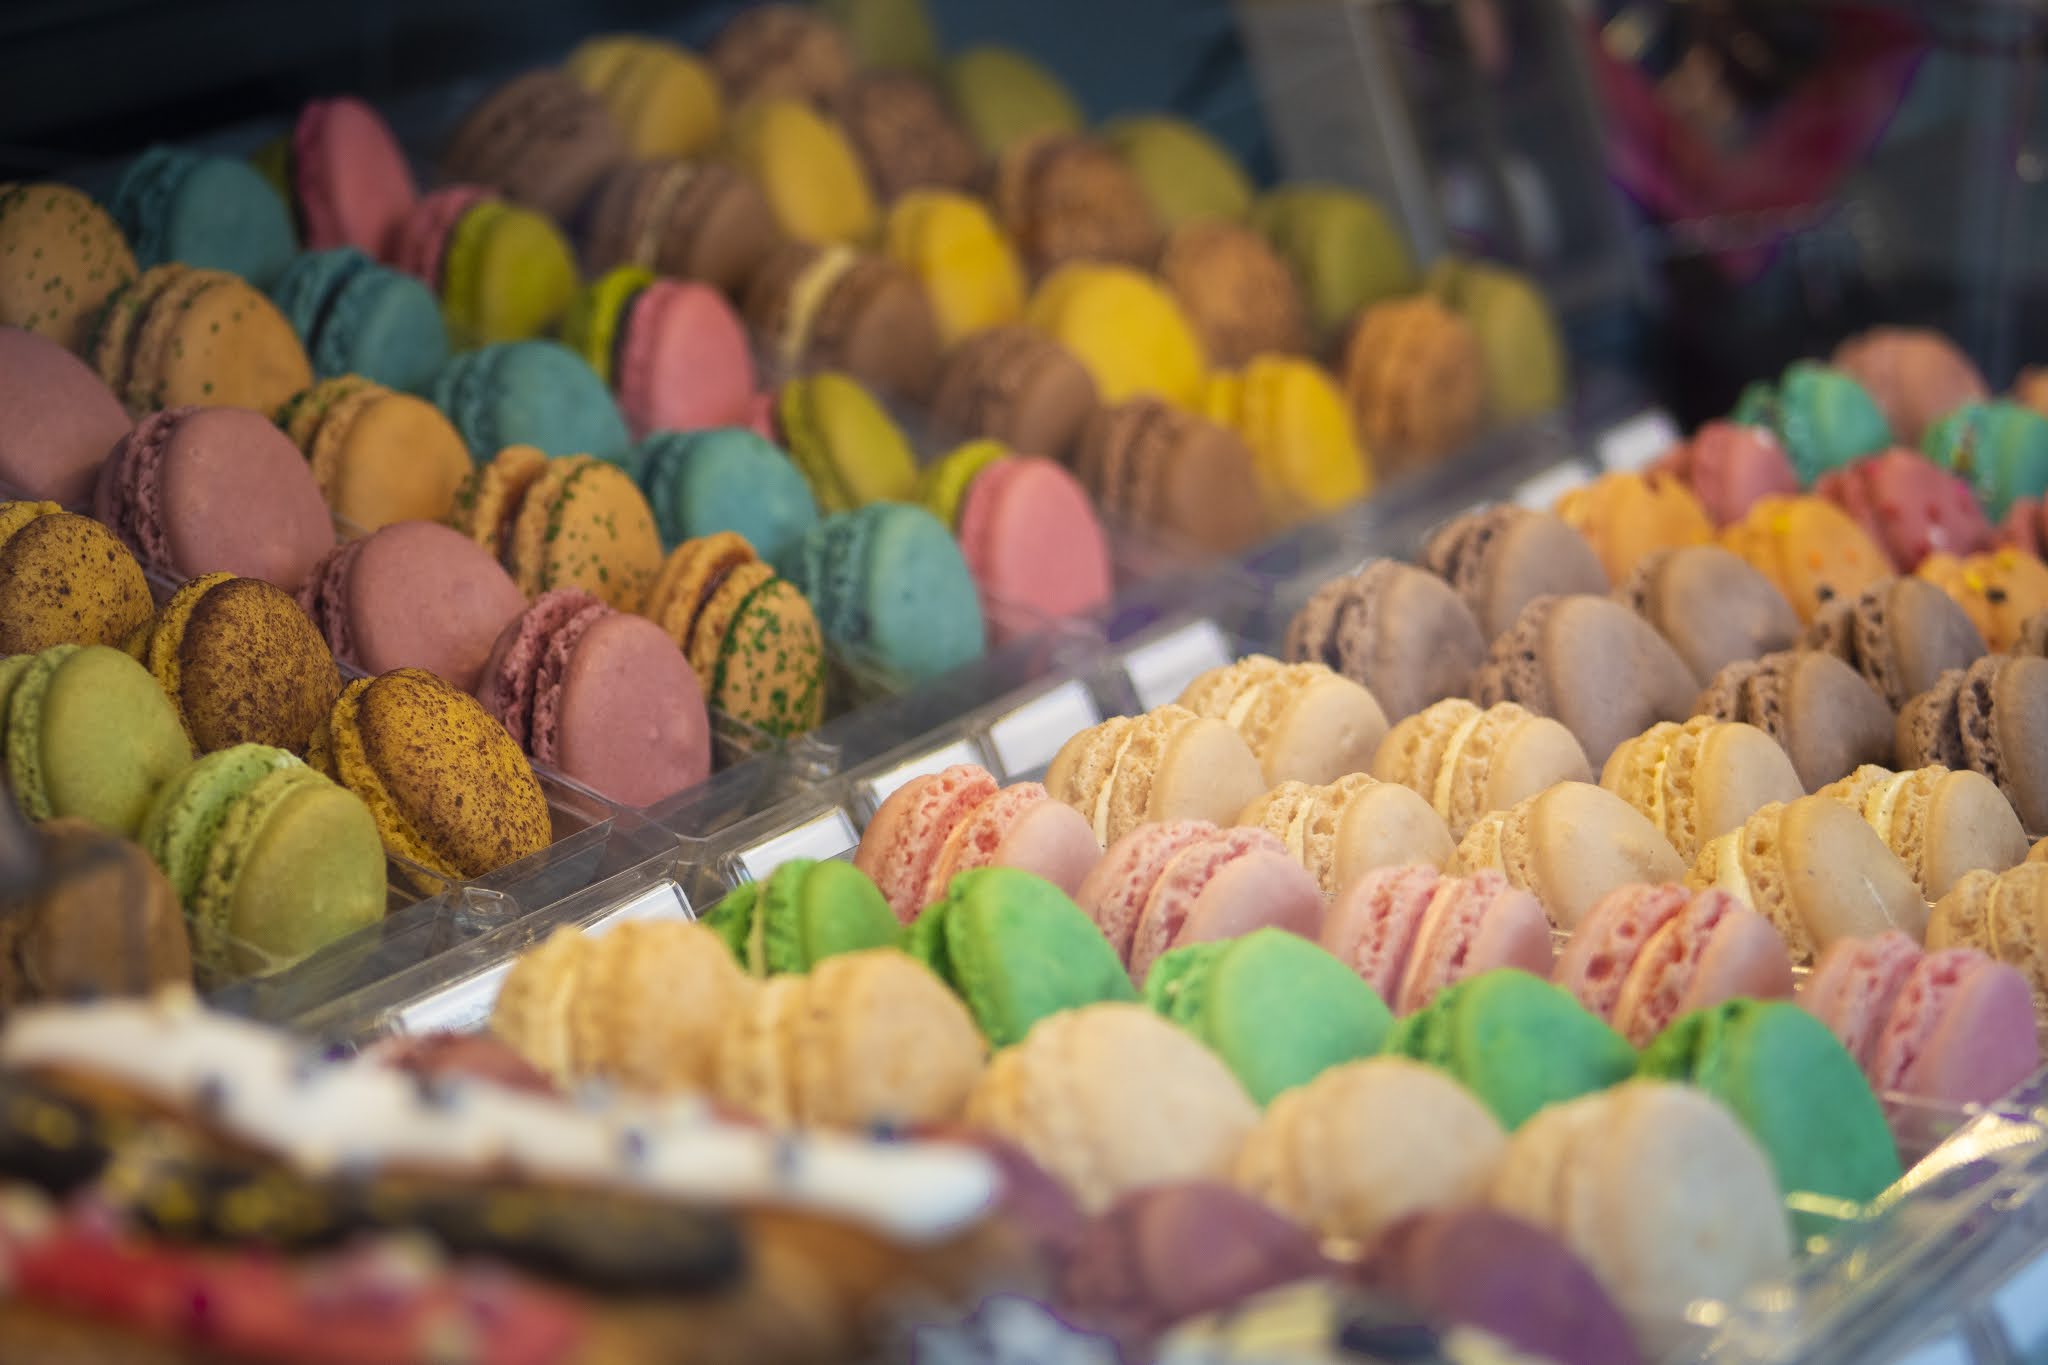 Le Macaron Opens First National Outdoor Kiosk of French Pastries at Alpharetta’s Avalon